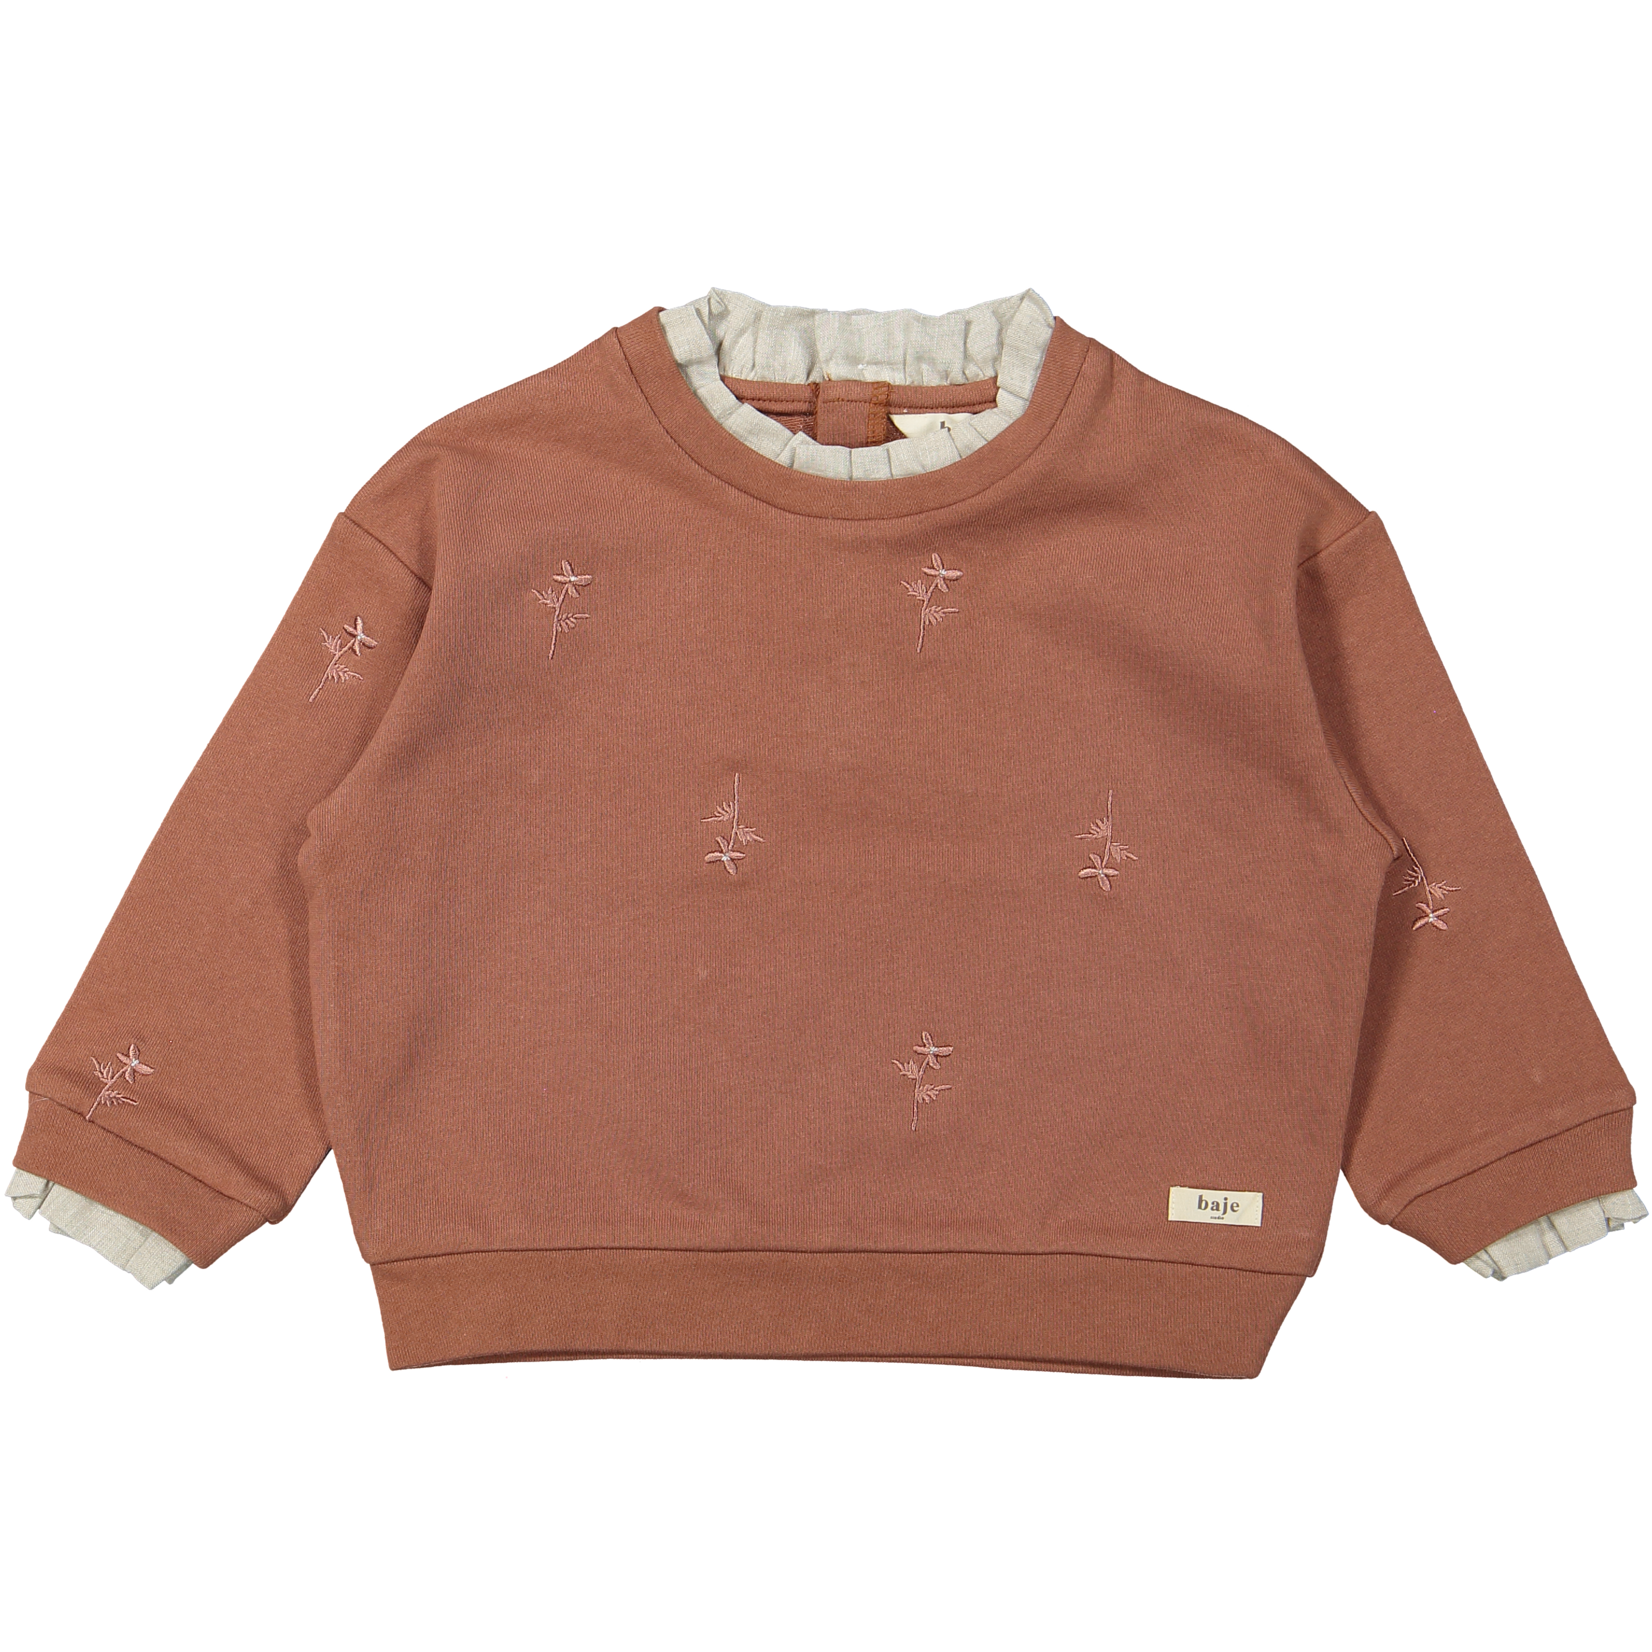 Baje Baje - Chisel knitted sweater embro -  Peach